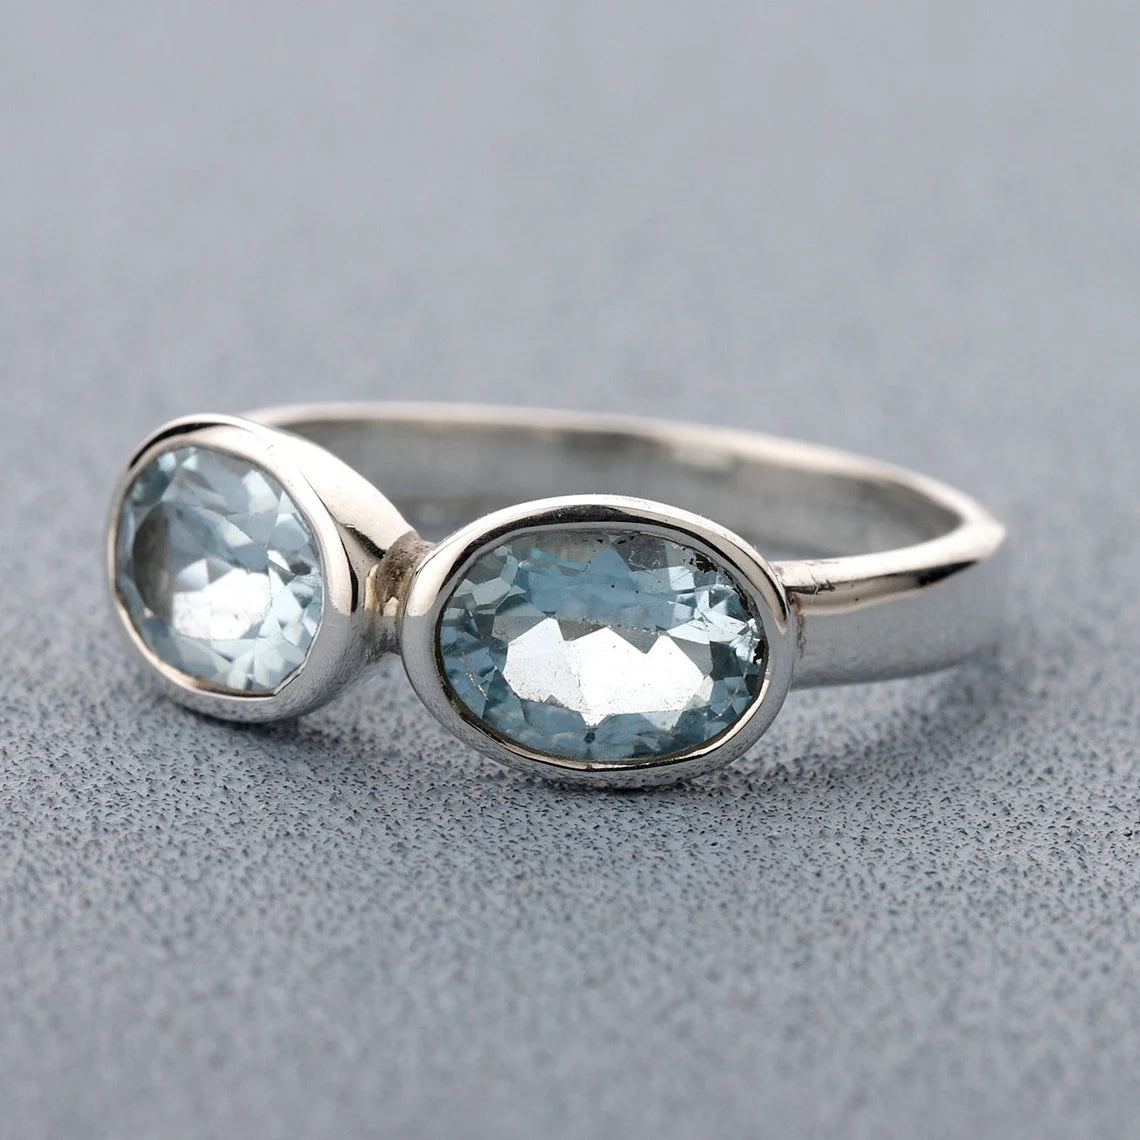 Natural Blue Topaz Ring - Oval Blue Topaz Ring - Two Stone Ring -925 Sterling Silver Ring Ring - Birthstone Ring